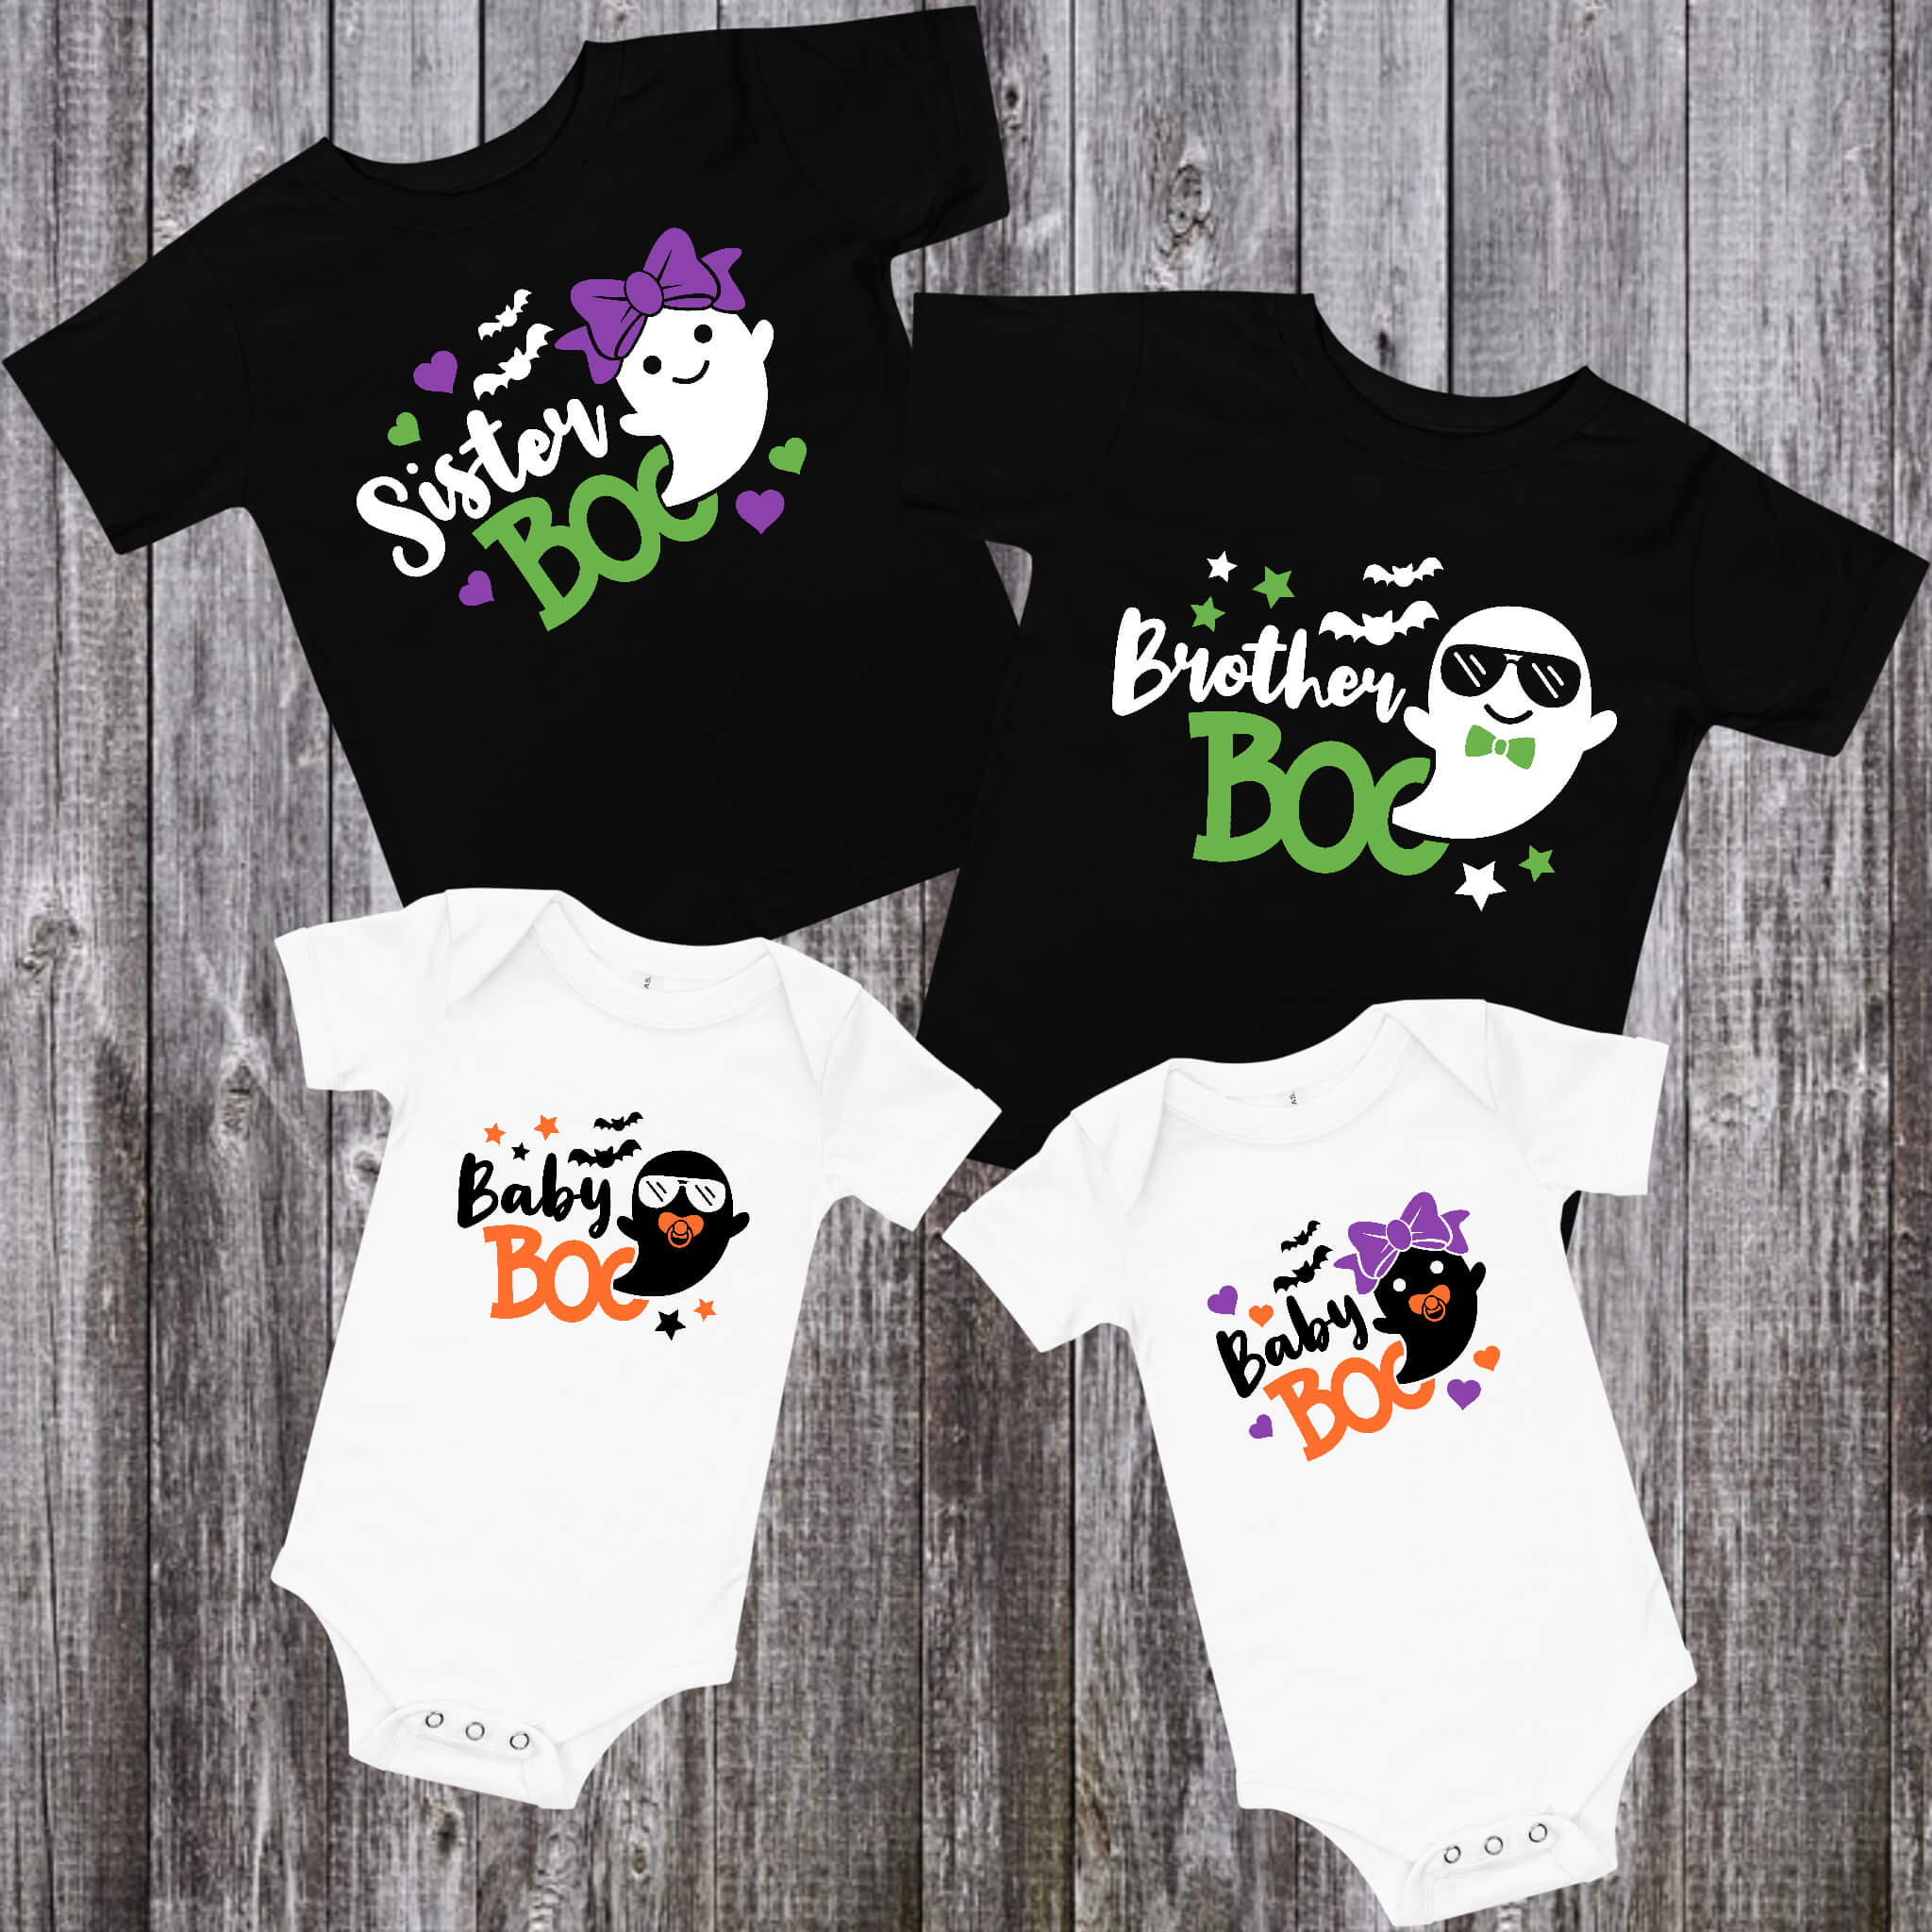 Halloween Boys Matching Brother Boo Sibling Graphic Print